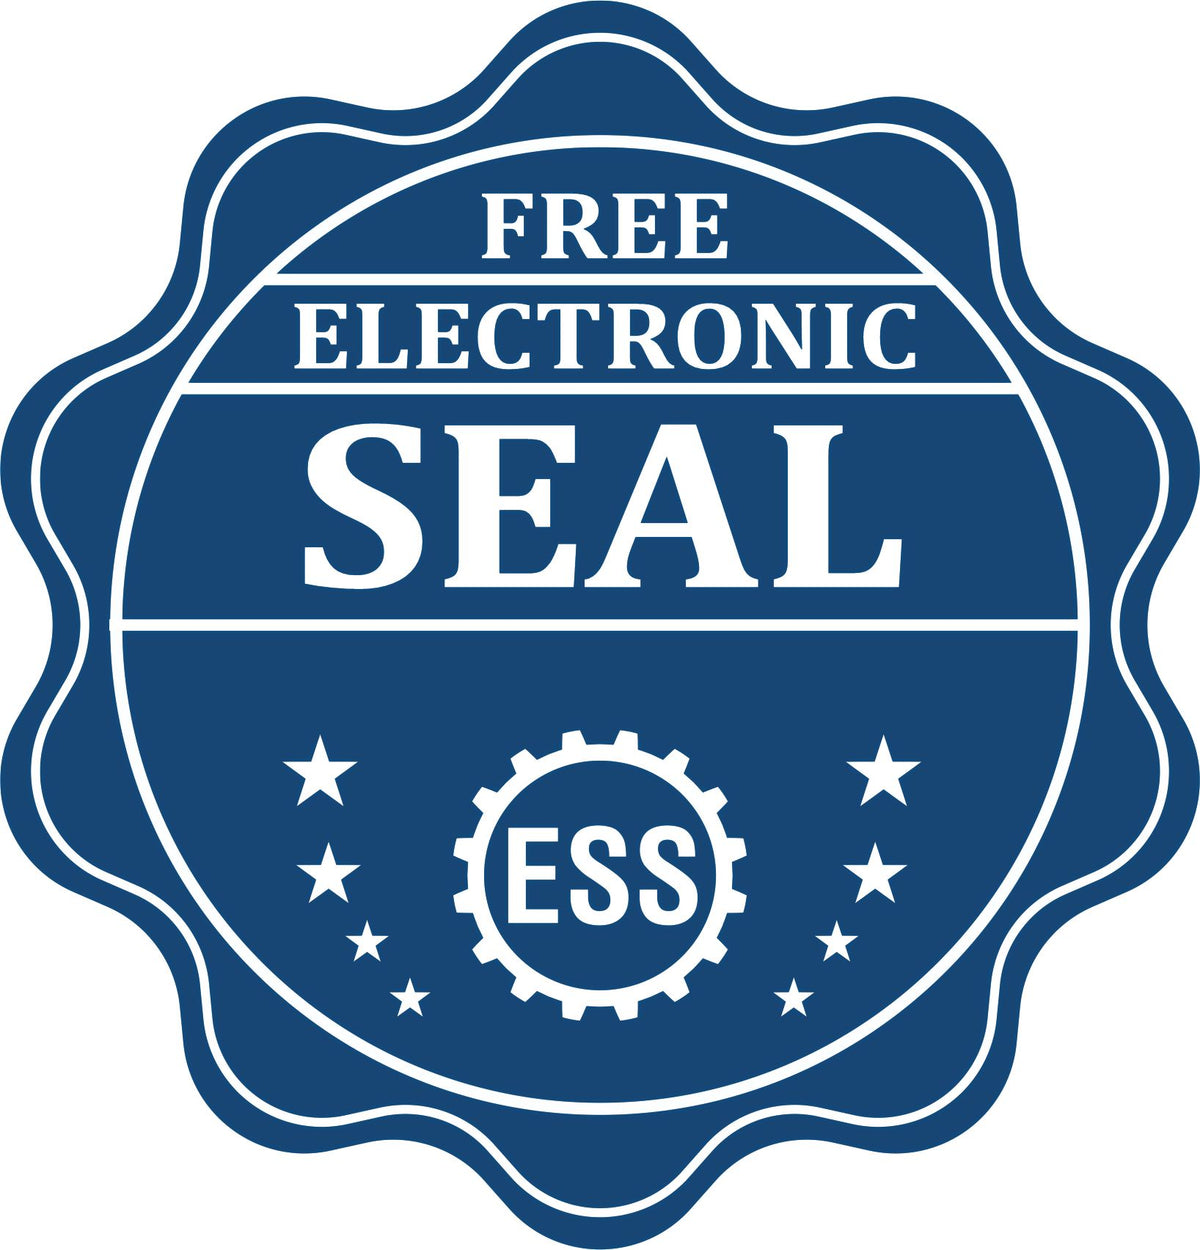 A badge showing a free electronic seal for the Heavy-Duty Colorado Rectangular Notary Stamp with stars and the ESS gear on the emblem.